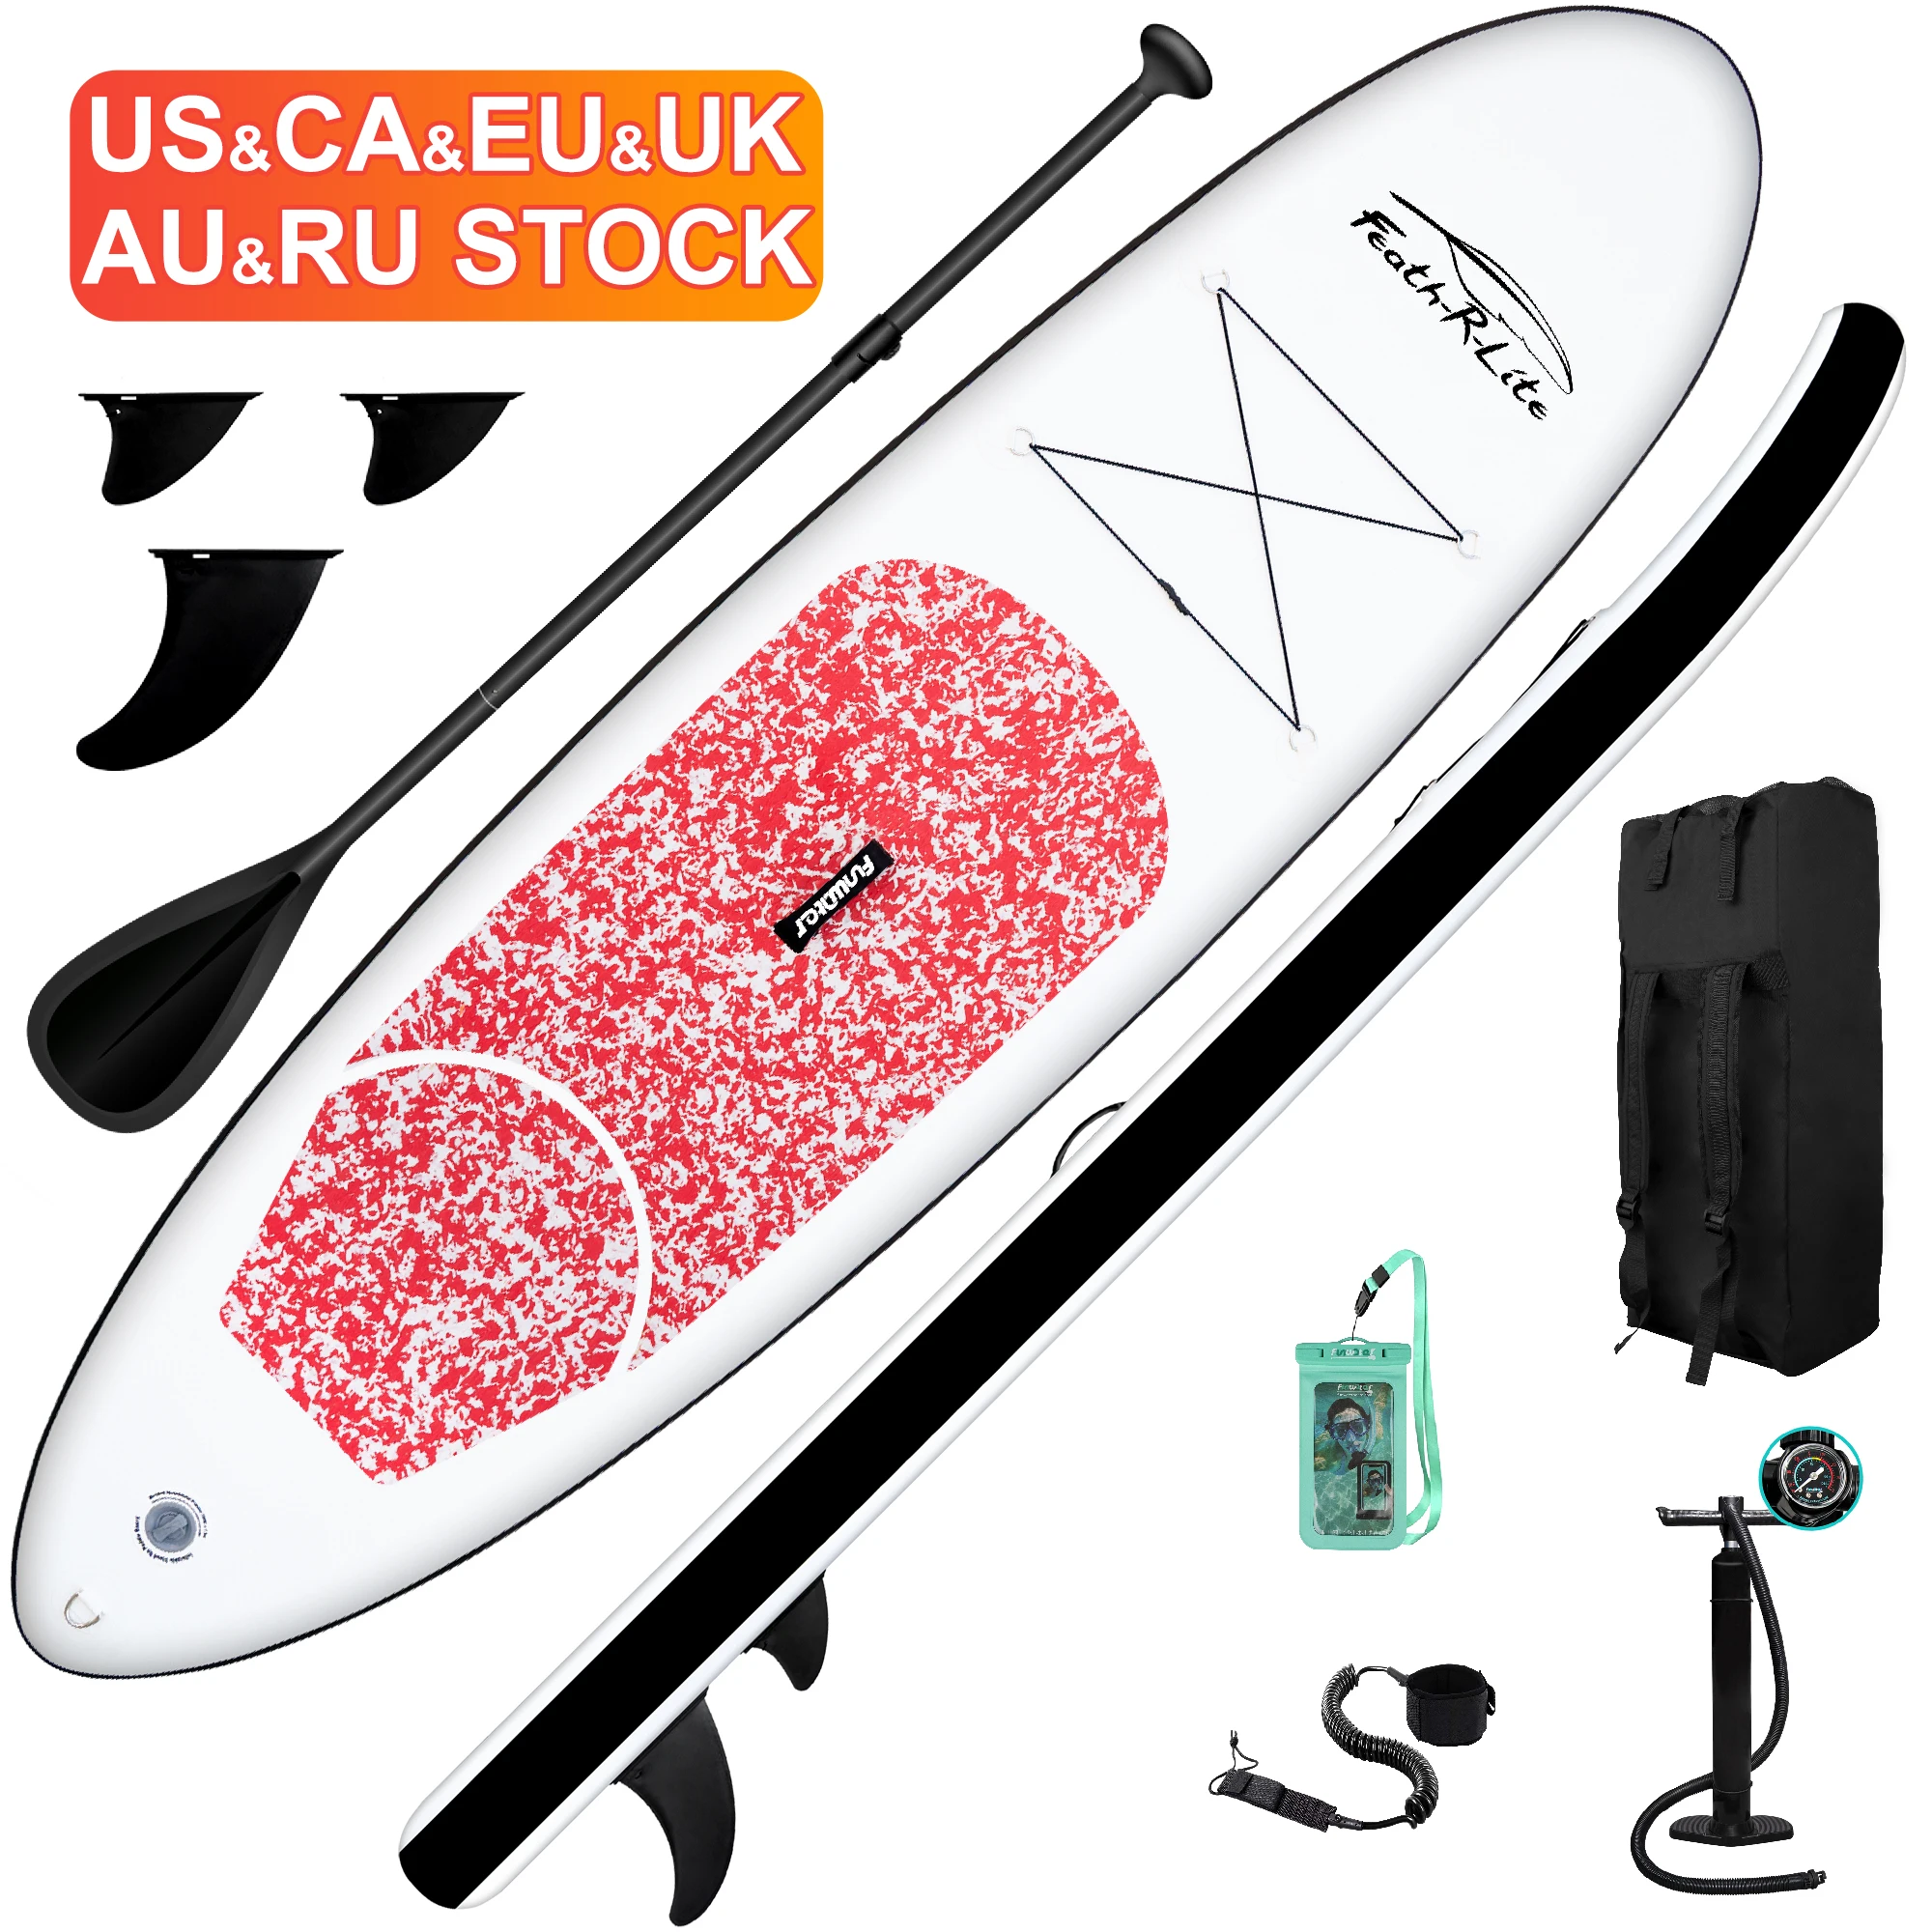 

FUNWATER Dropshipping OEM Cheap 10' surfboard inflatable sup board surf paddleboard for women stand up paddle board isup sufing